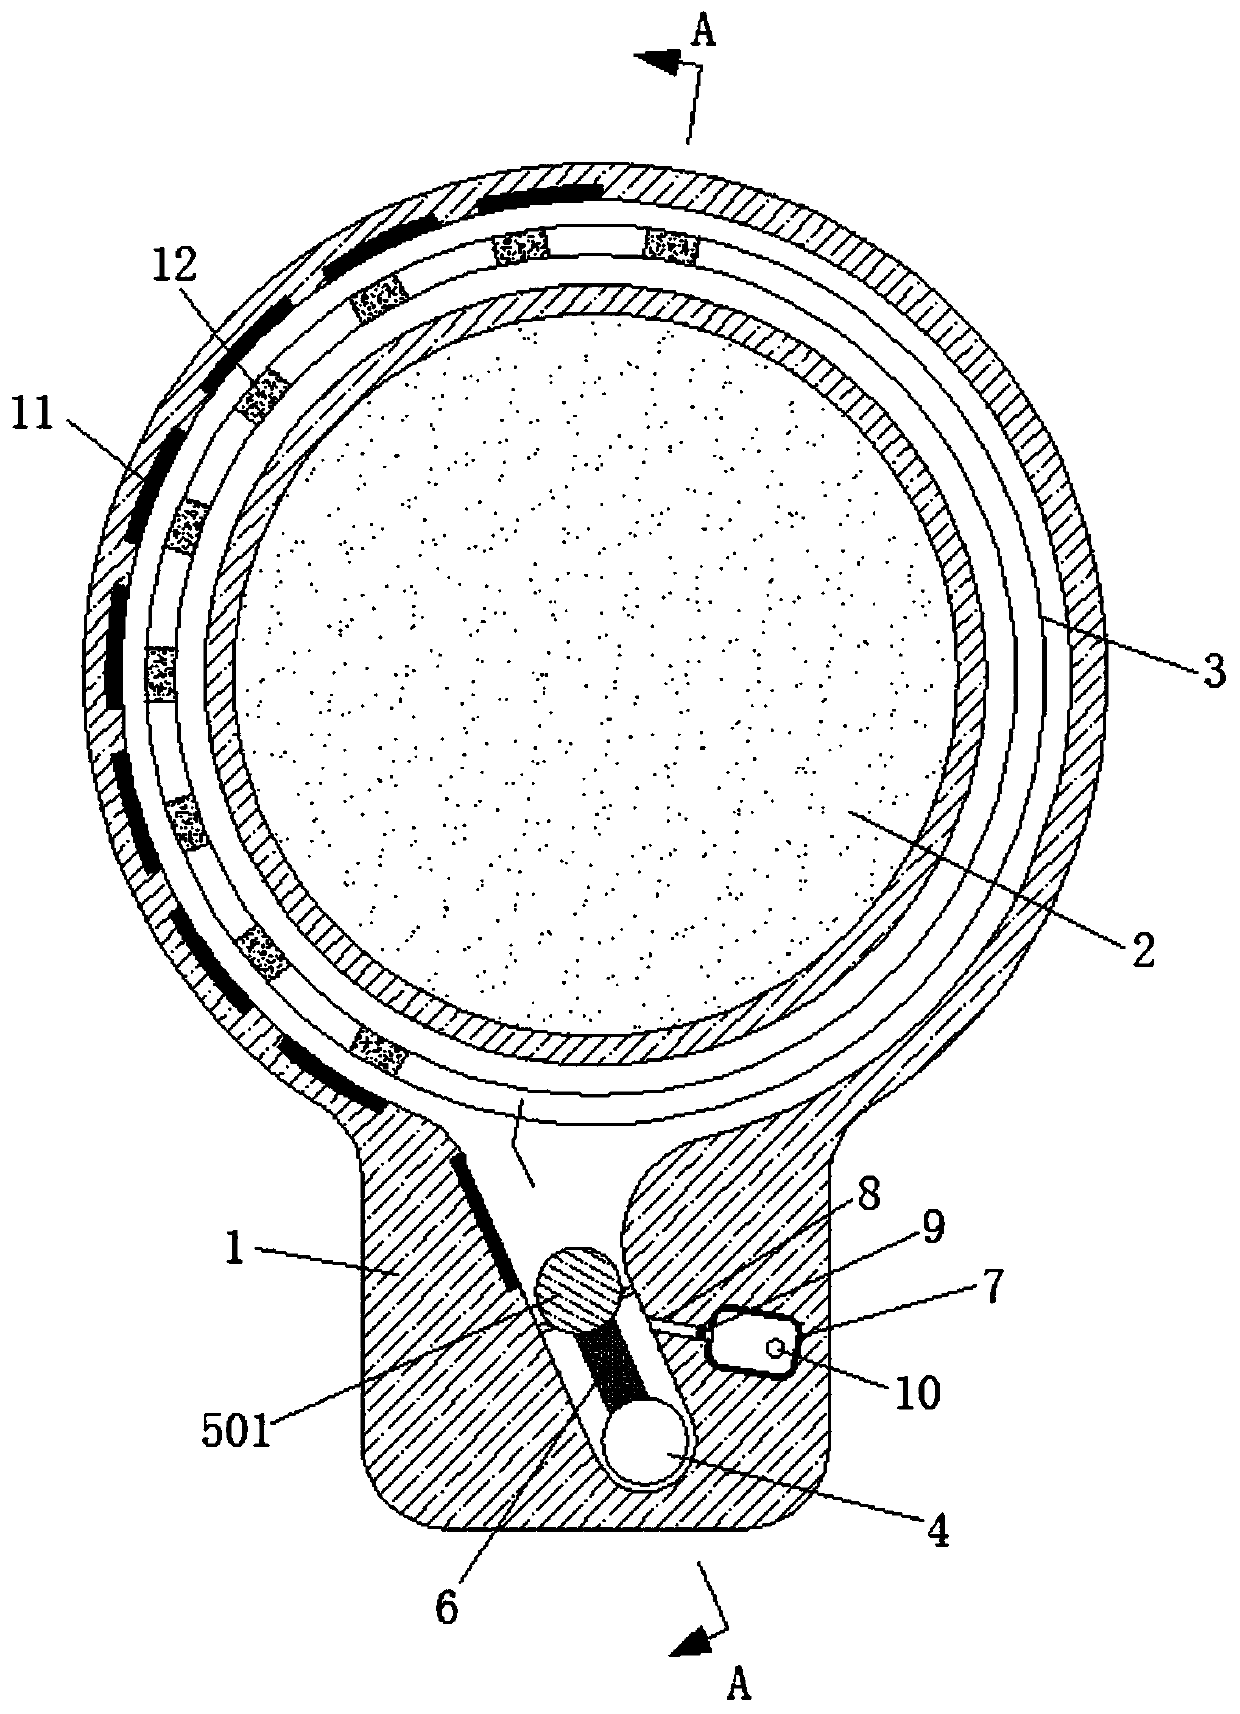 Fire-fighting unmanned aerial vehicle lens cleaning device capable of preventing smoking based on magnetic force change